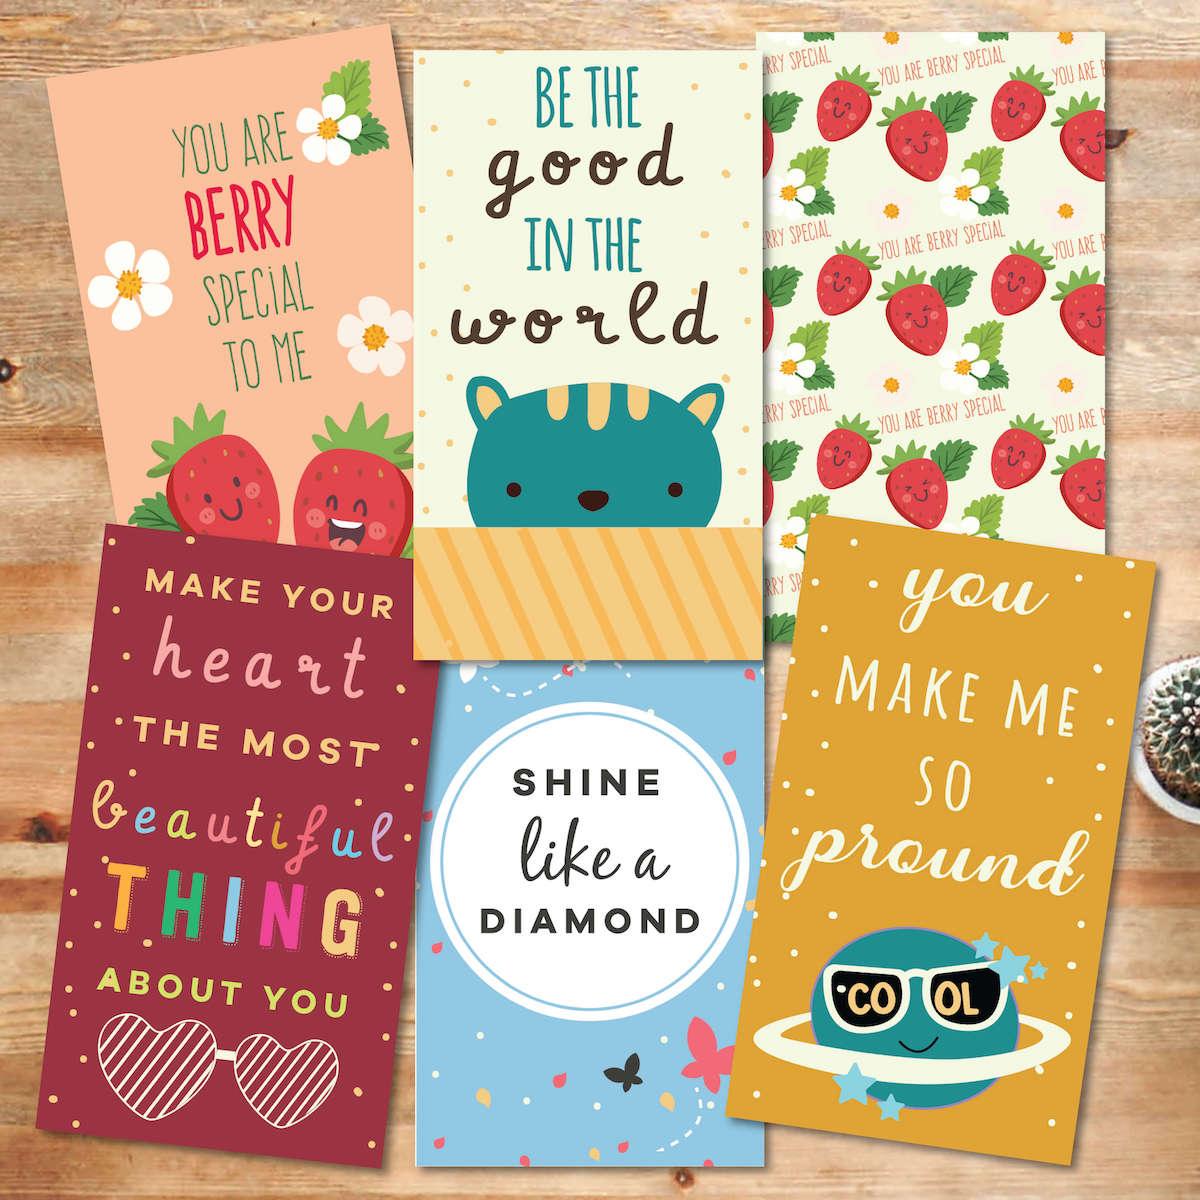 30 Pack Inspirational Motivational Lunch Box Notes Small Cards with Positive Quotes - Belle Rose Nails